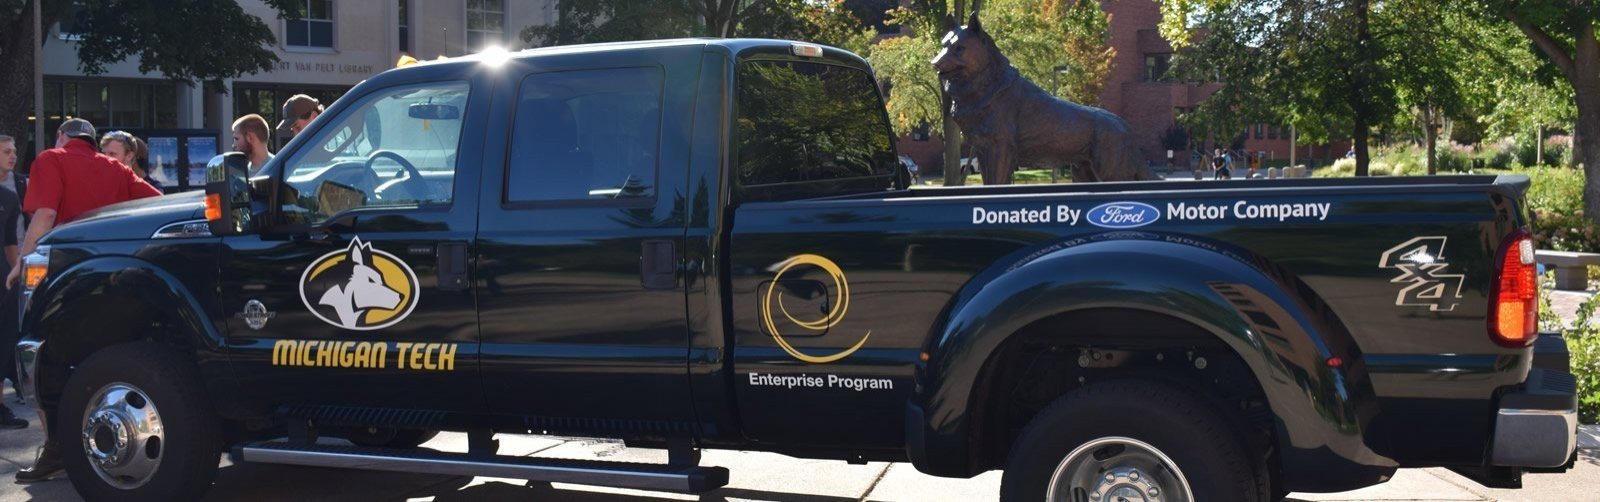 The truck donated by Ford to The Enterprise Program is on display on campus.